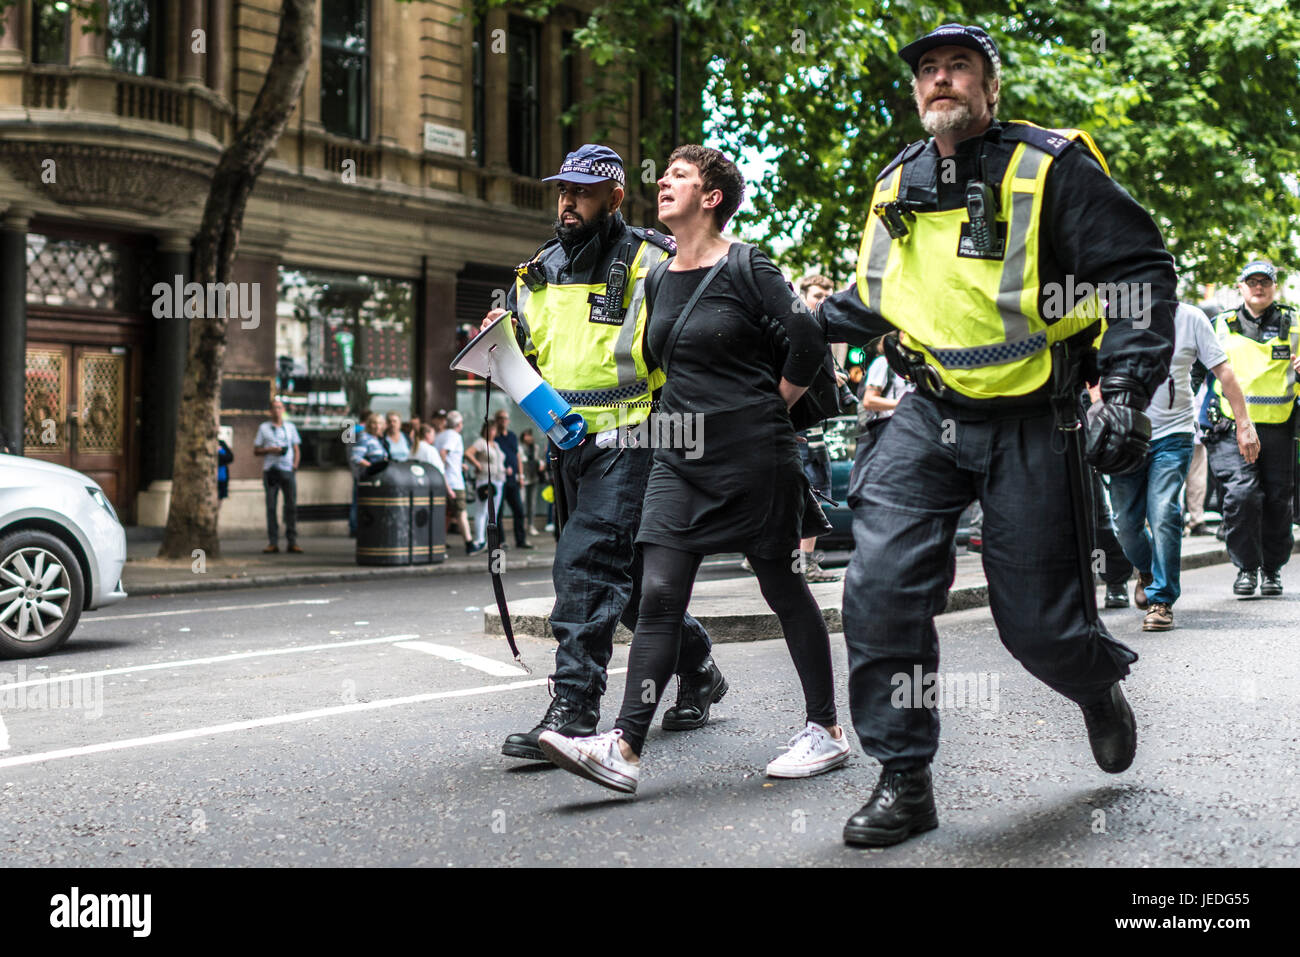 London, UK, 24th June 2017. Unite Against Fascism (UAF) has organized a demonstration near Trafalgar Square against the English Defence League (EDL).  Woman being arrested. Due to recent terrorist attacks, there’s a heavy police presence. Credit: onebluelight.com/Alamy Live News Credit: onebluelight.com/Alamy Live News Stock Photo